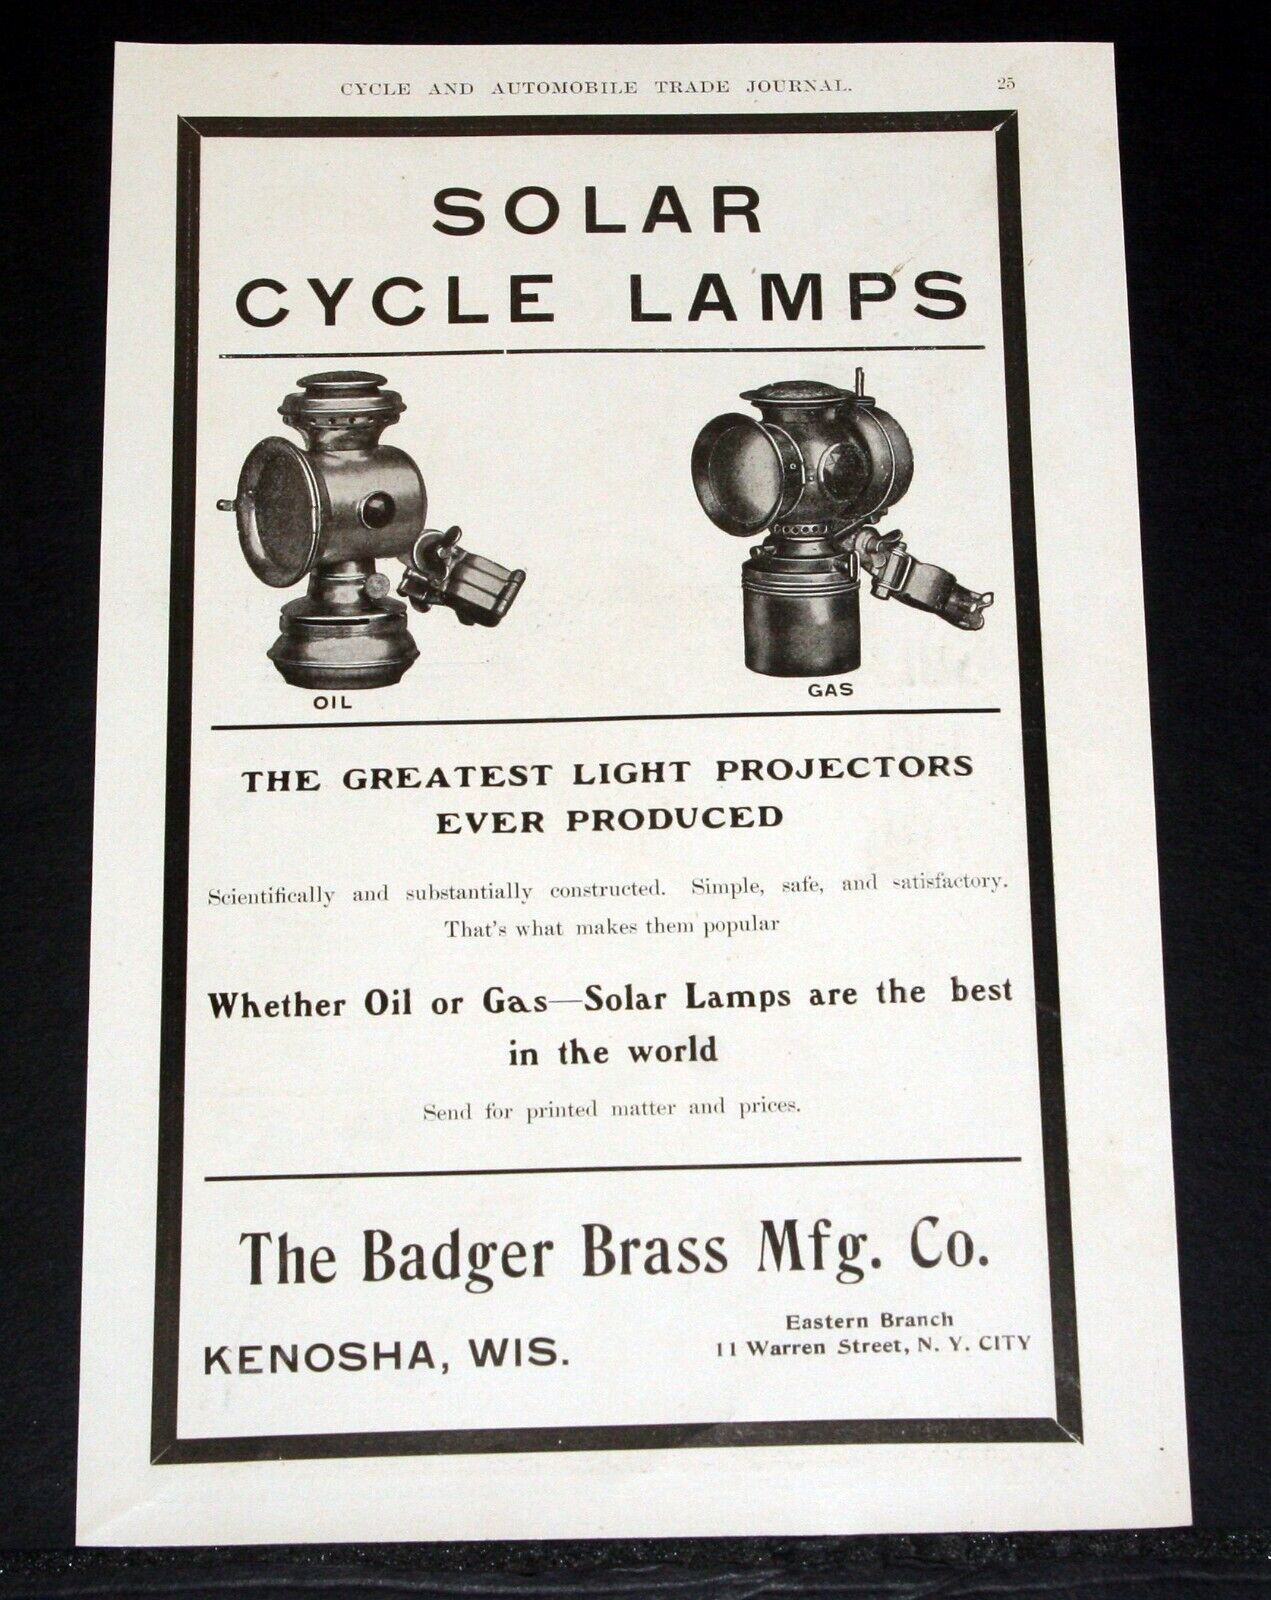 1904 OLD MAGAZINE PRINT AD, BADGER BRASS, SOLAR CYCLE LAMPS, THE GREATEST EVER